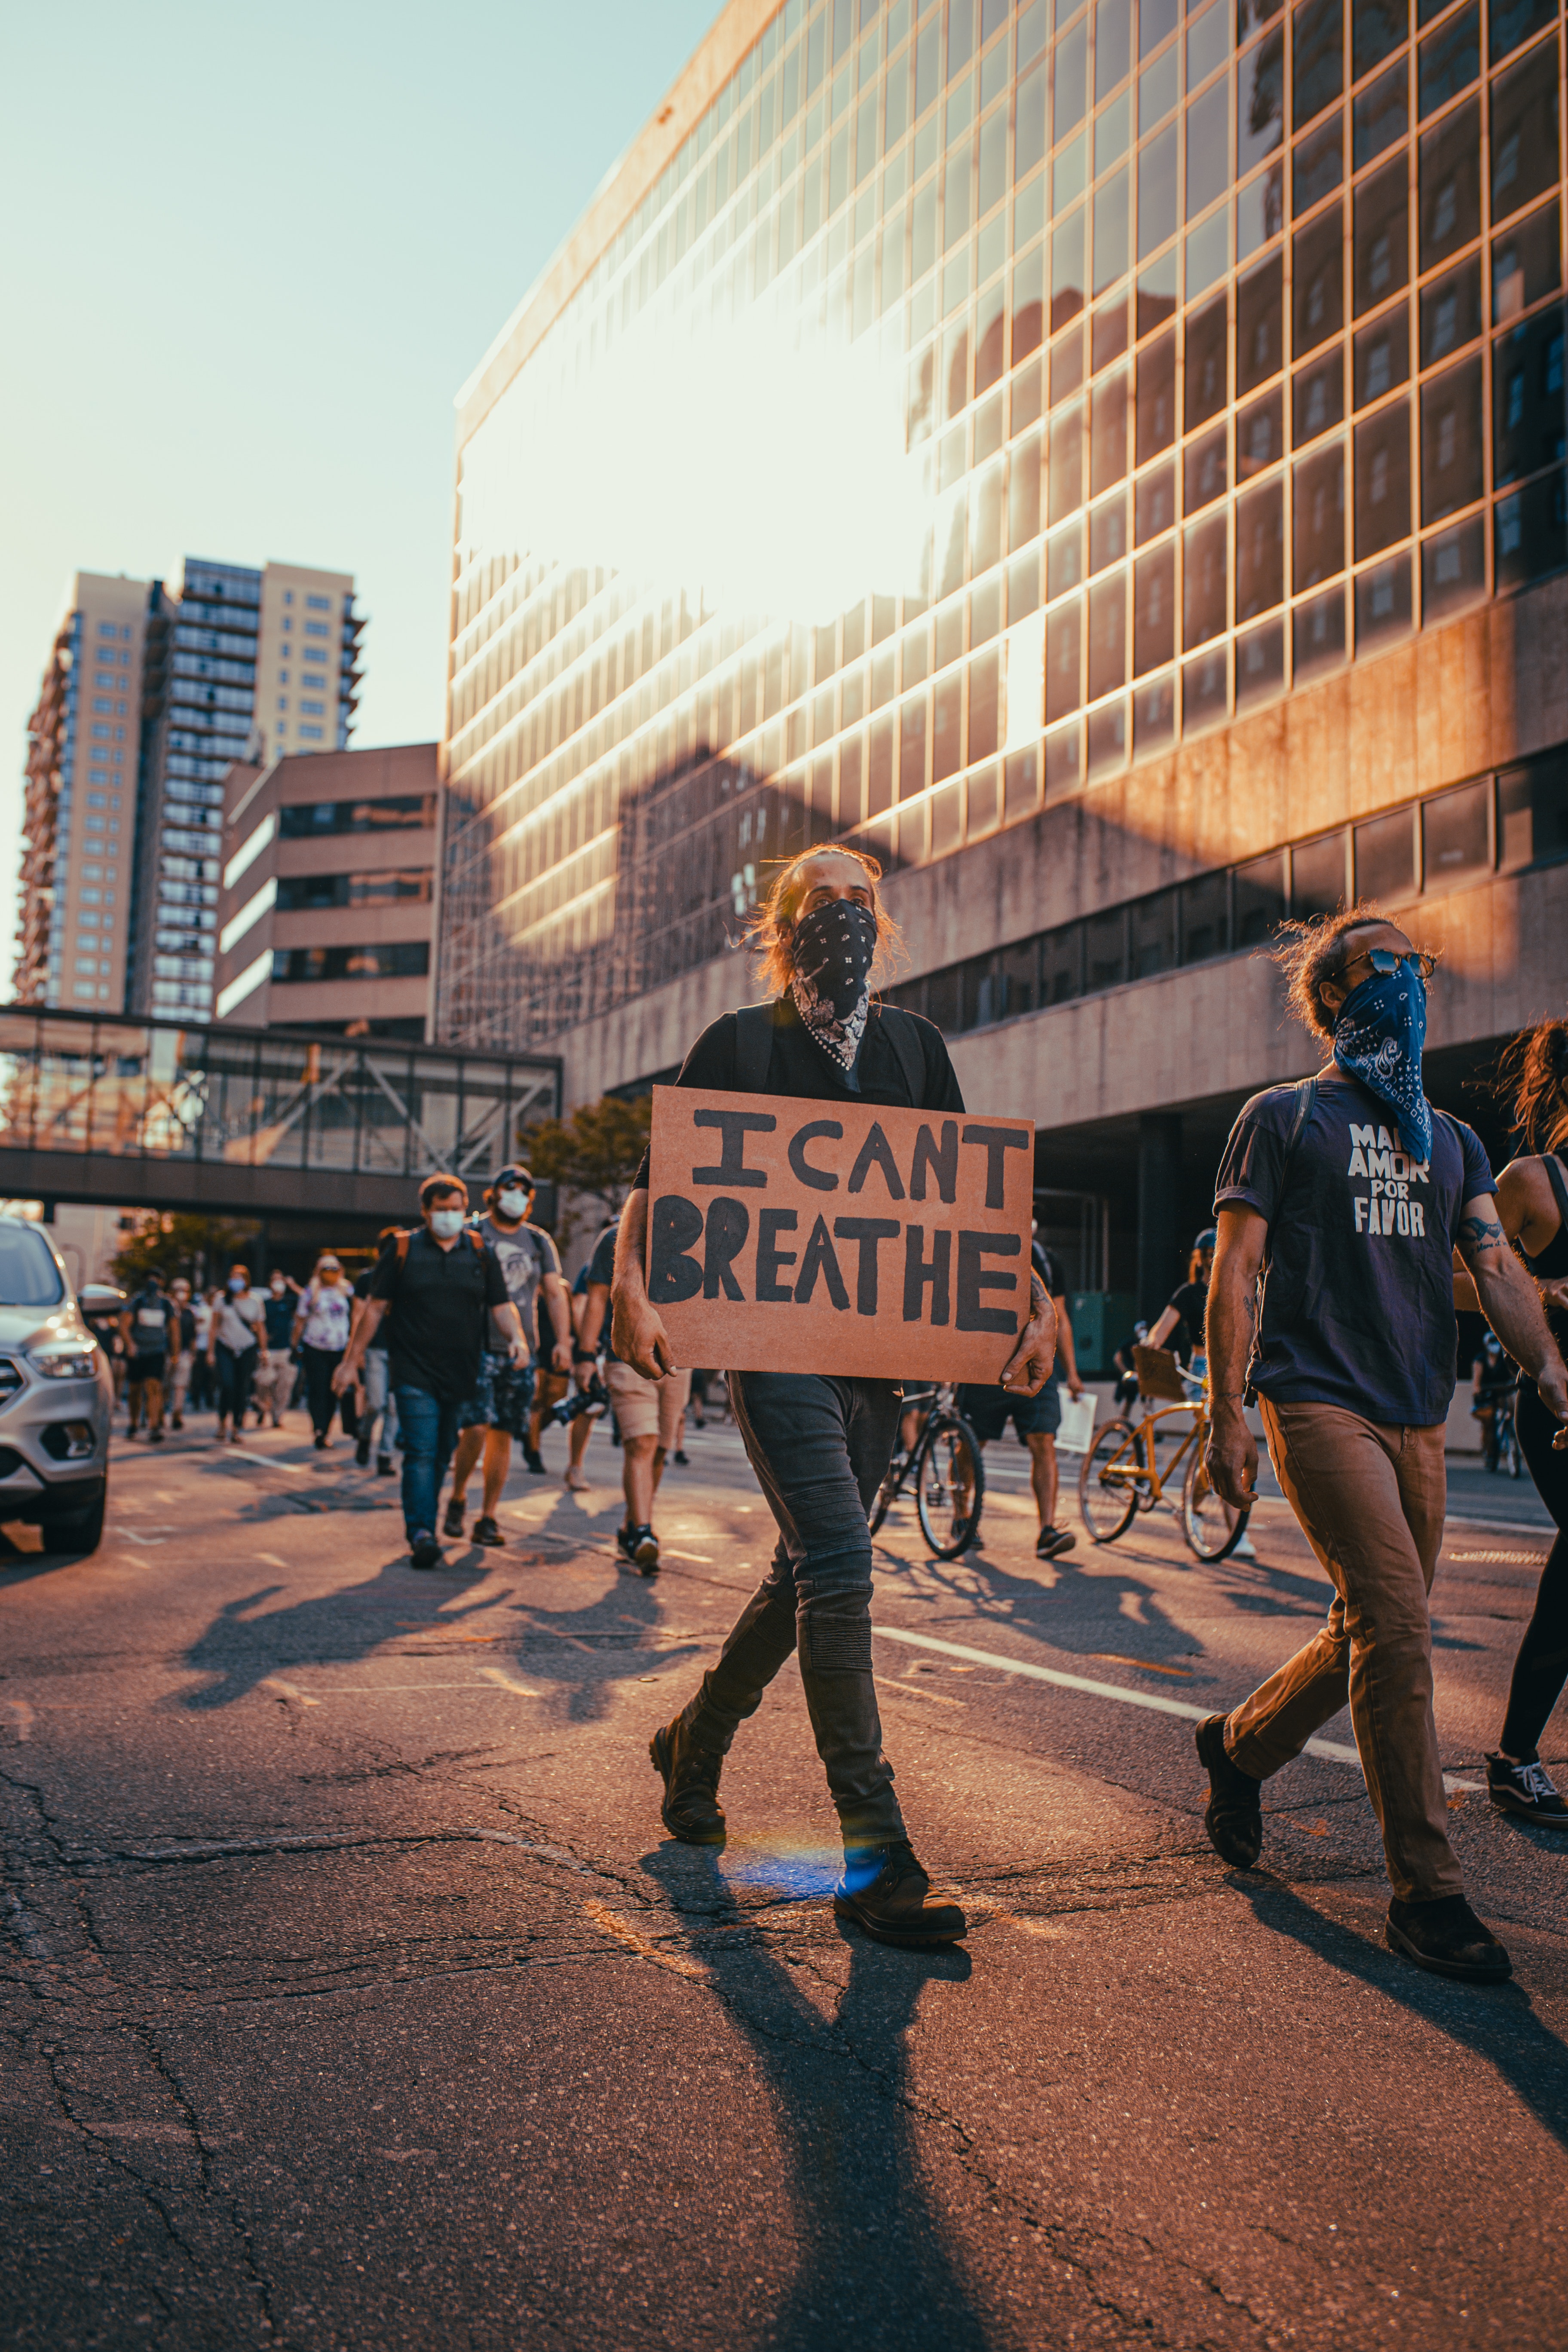 A protestor holding a sign that reads 'I CAN'T BREATHE' during a demonstration, with others around on a city street at sunset, reflecting the sentiments of the Black Lives Matter movement.